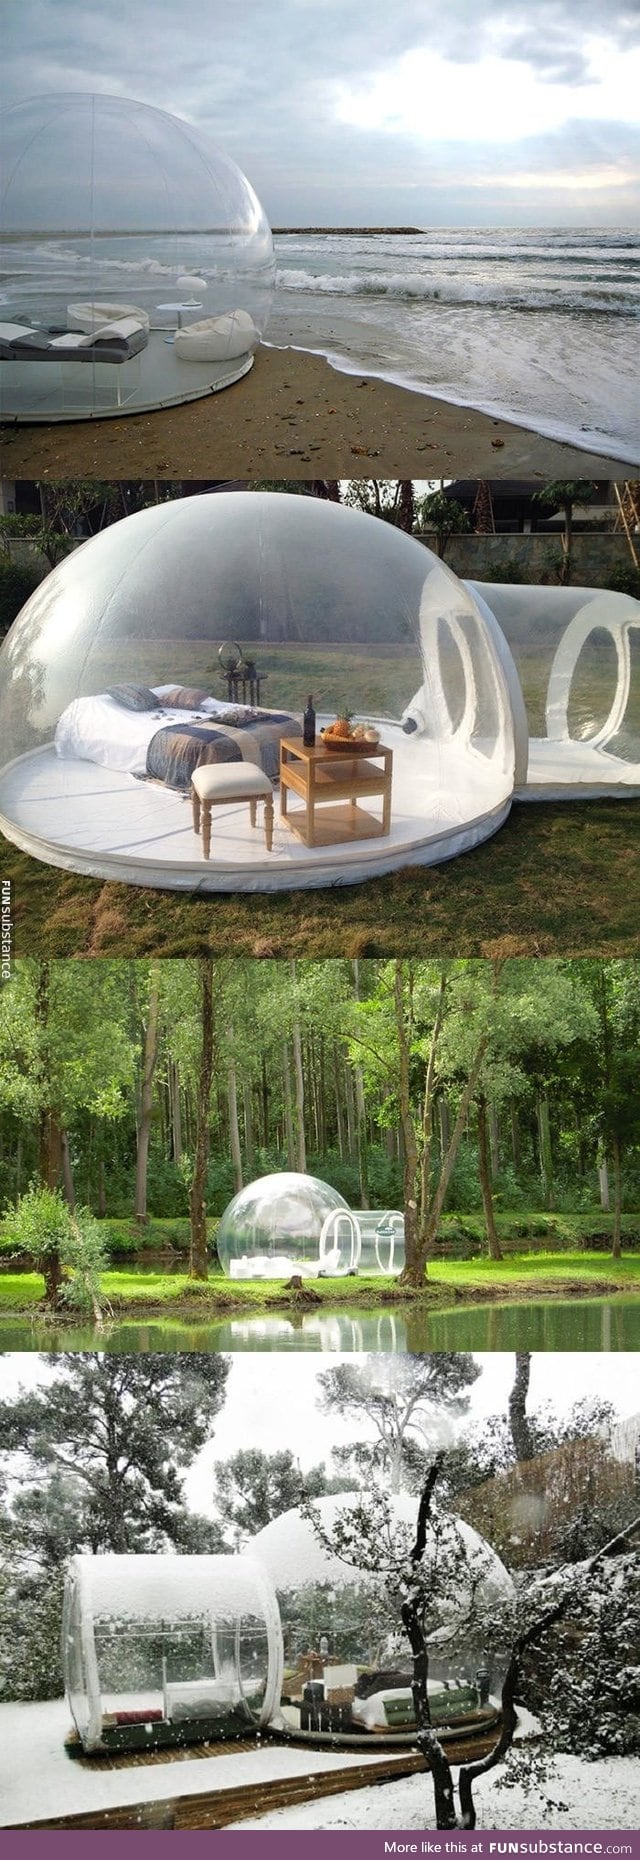 Transparent bubble tent lets you sleep underneath the stars